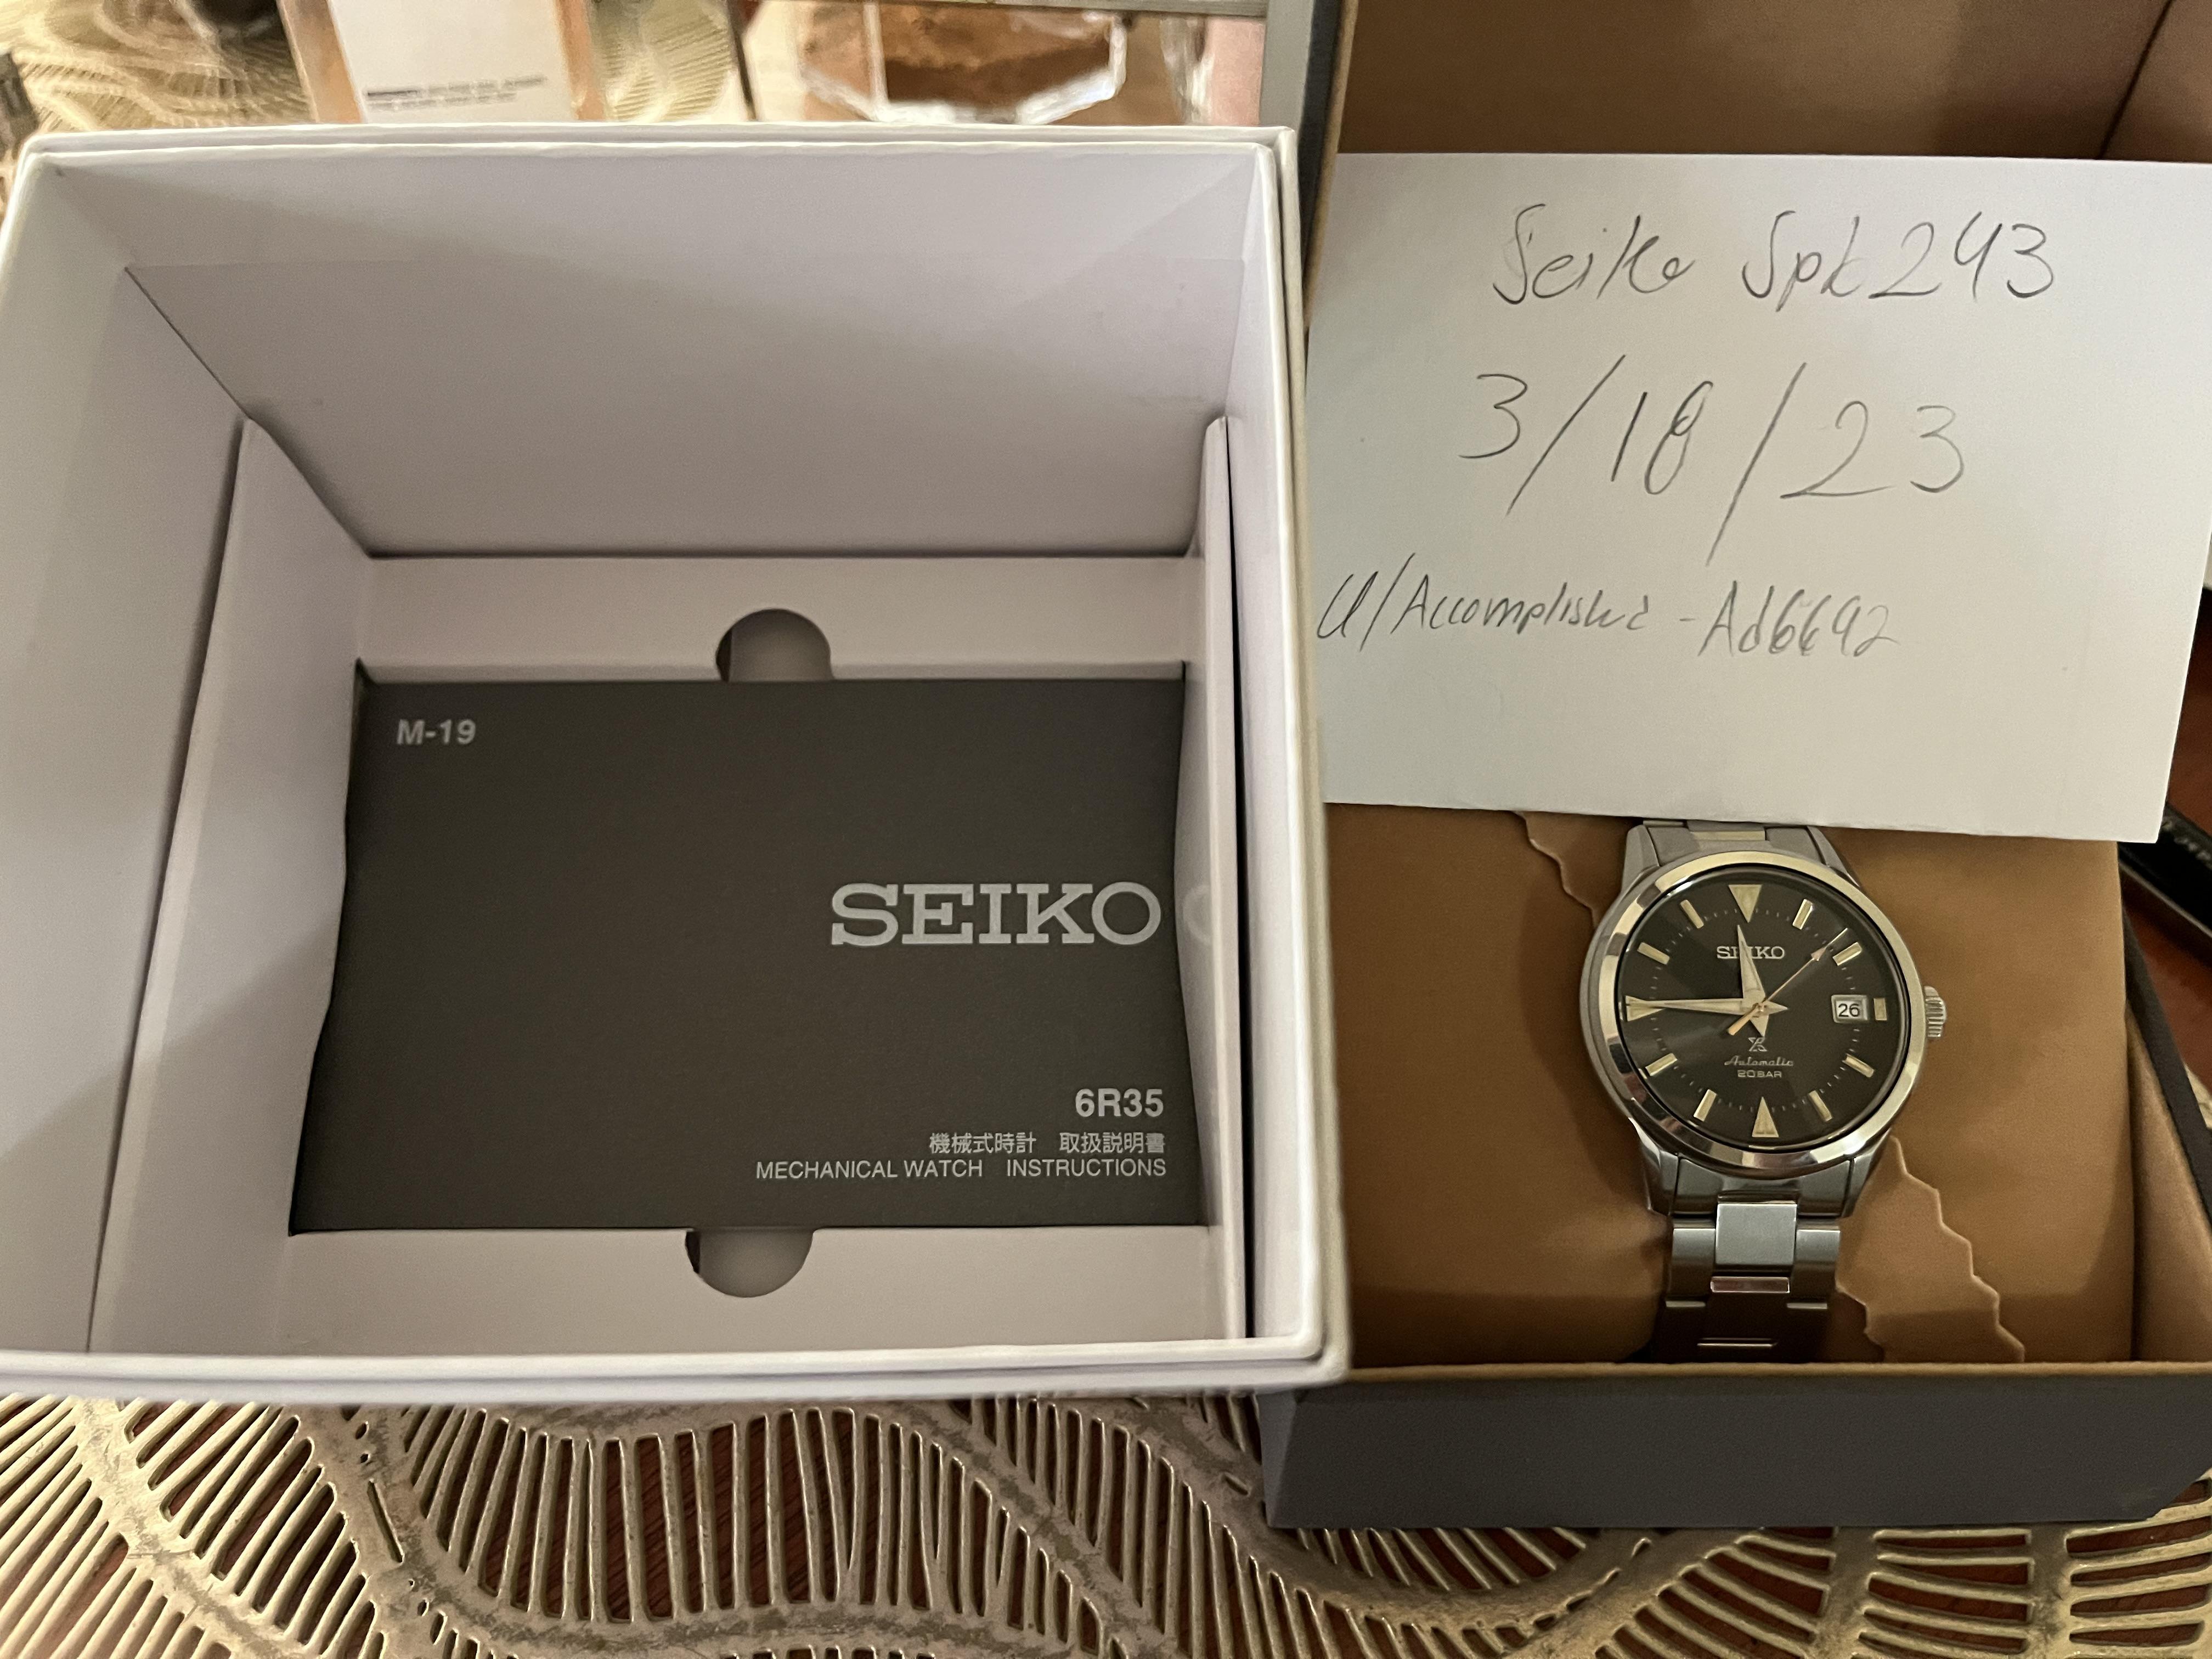 WTS] Seiko SPB 243 in Like New Condition | WatchCharts